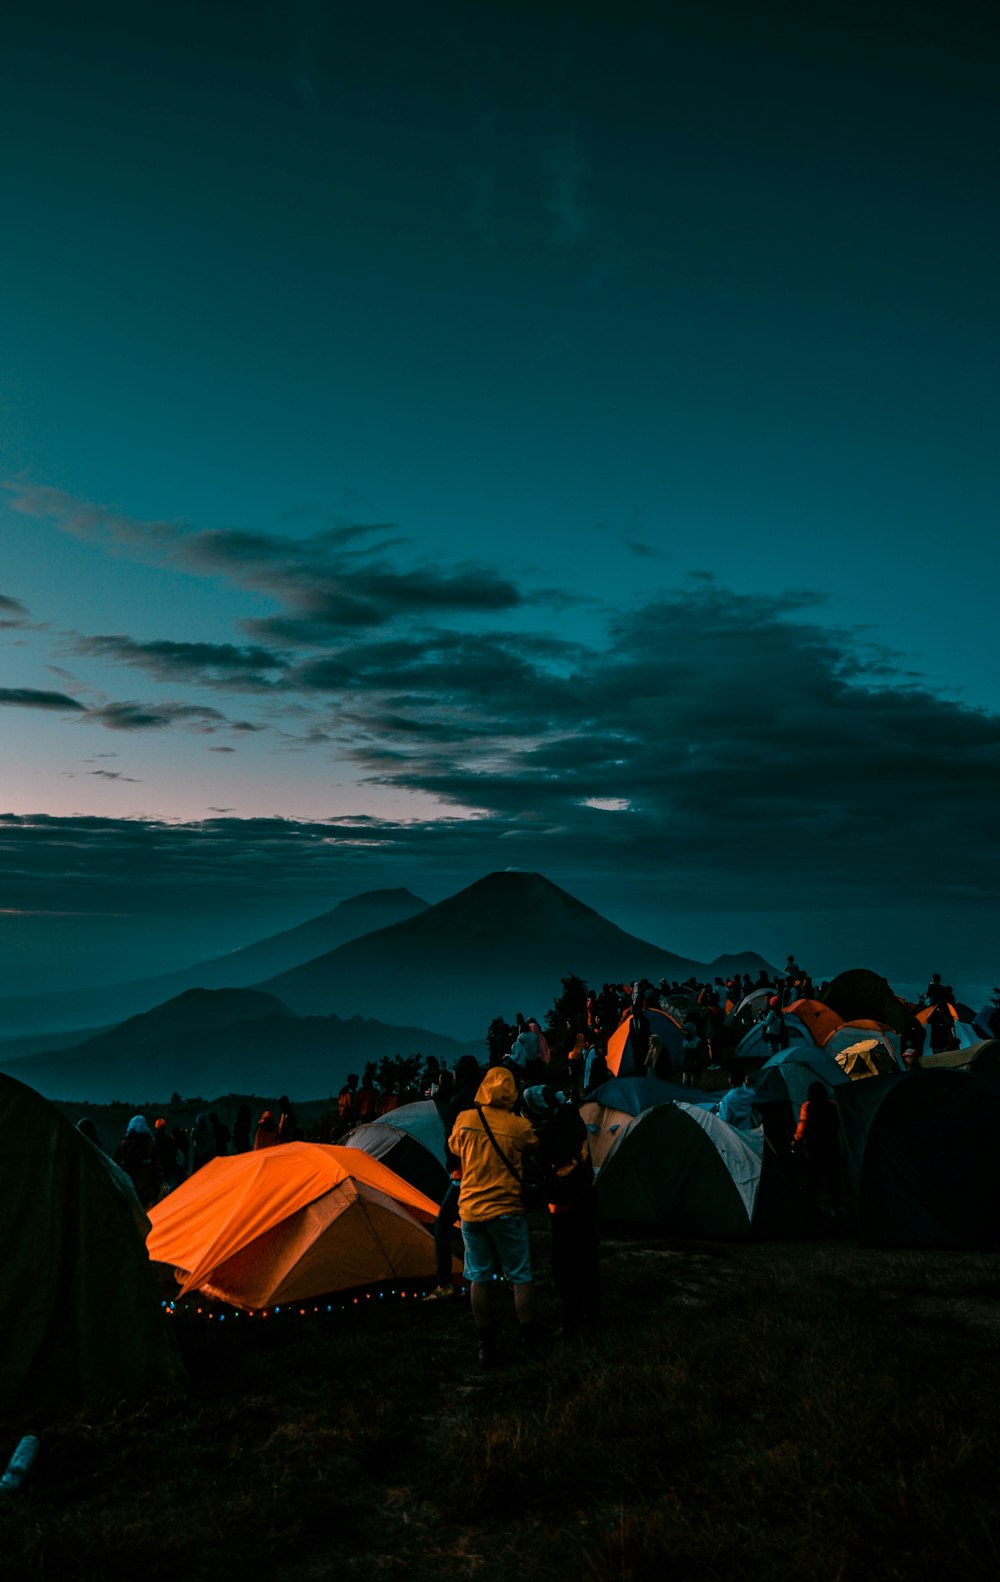 group of people sitting on camping chairs near mountain during night time